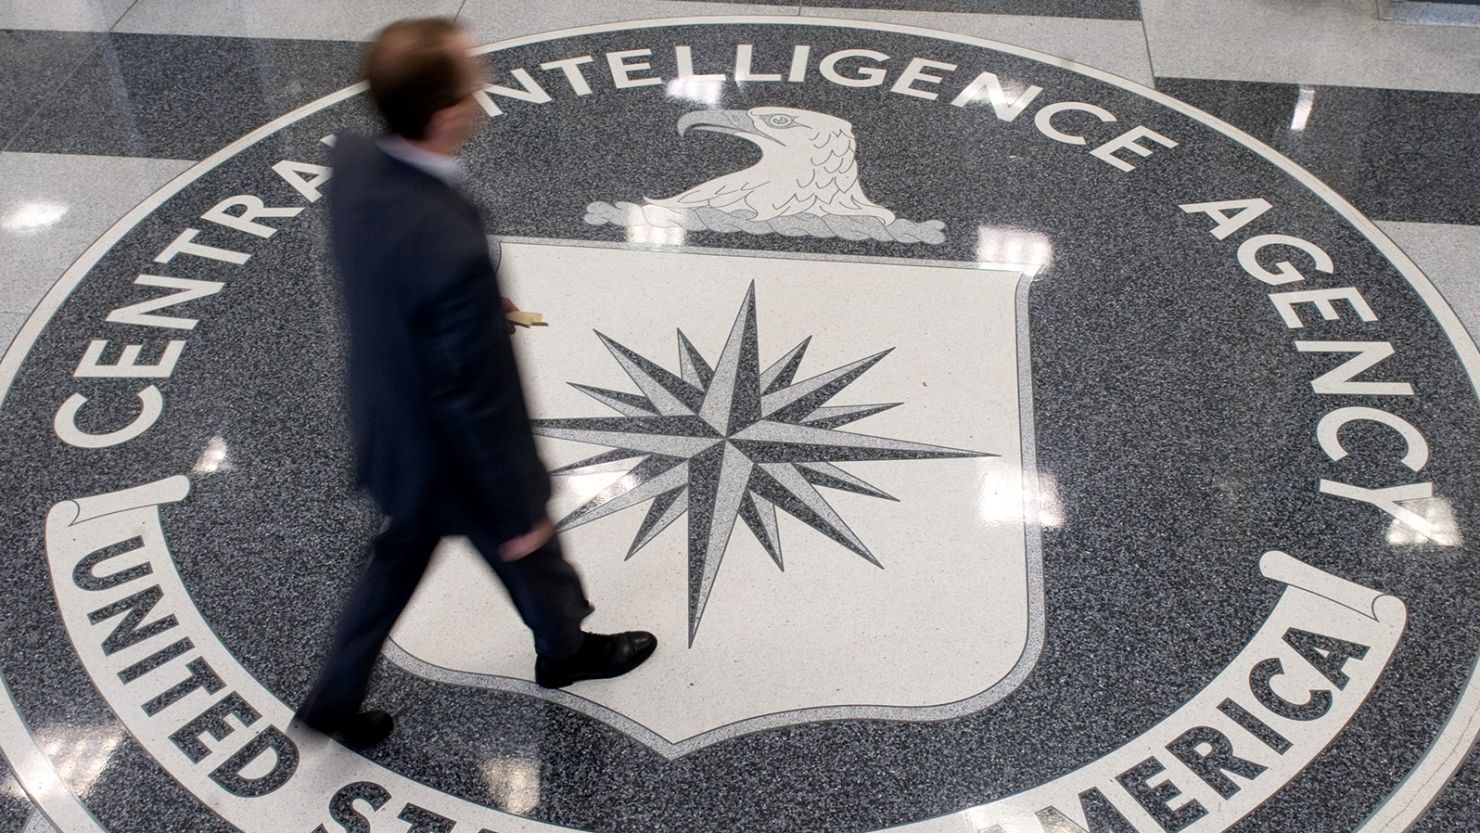 A man crosses the Central Intelligence Agency (CIA) seal in the lobby of CIA Headquarters in Langley, Virginia, on August 14, 2008. AFP PHOTO/SAUL LOEB (Photo by SAUL LOEB / AFP) (Photo by SAUL LOEB/AFP via Getty Images)